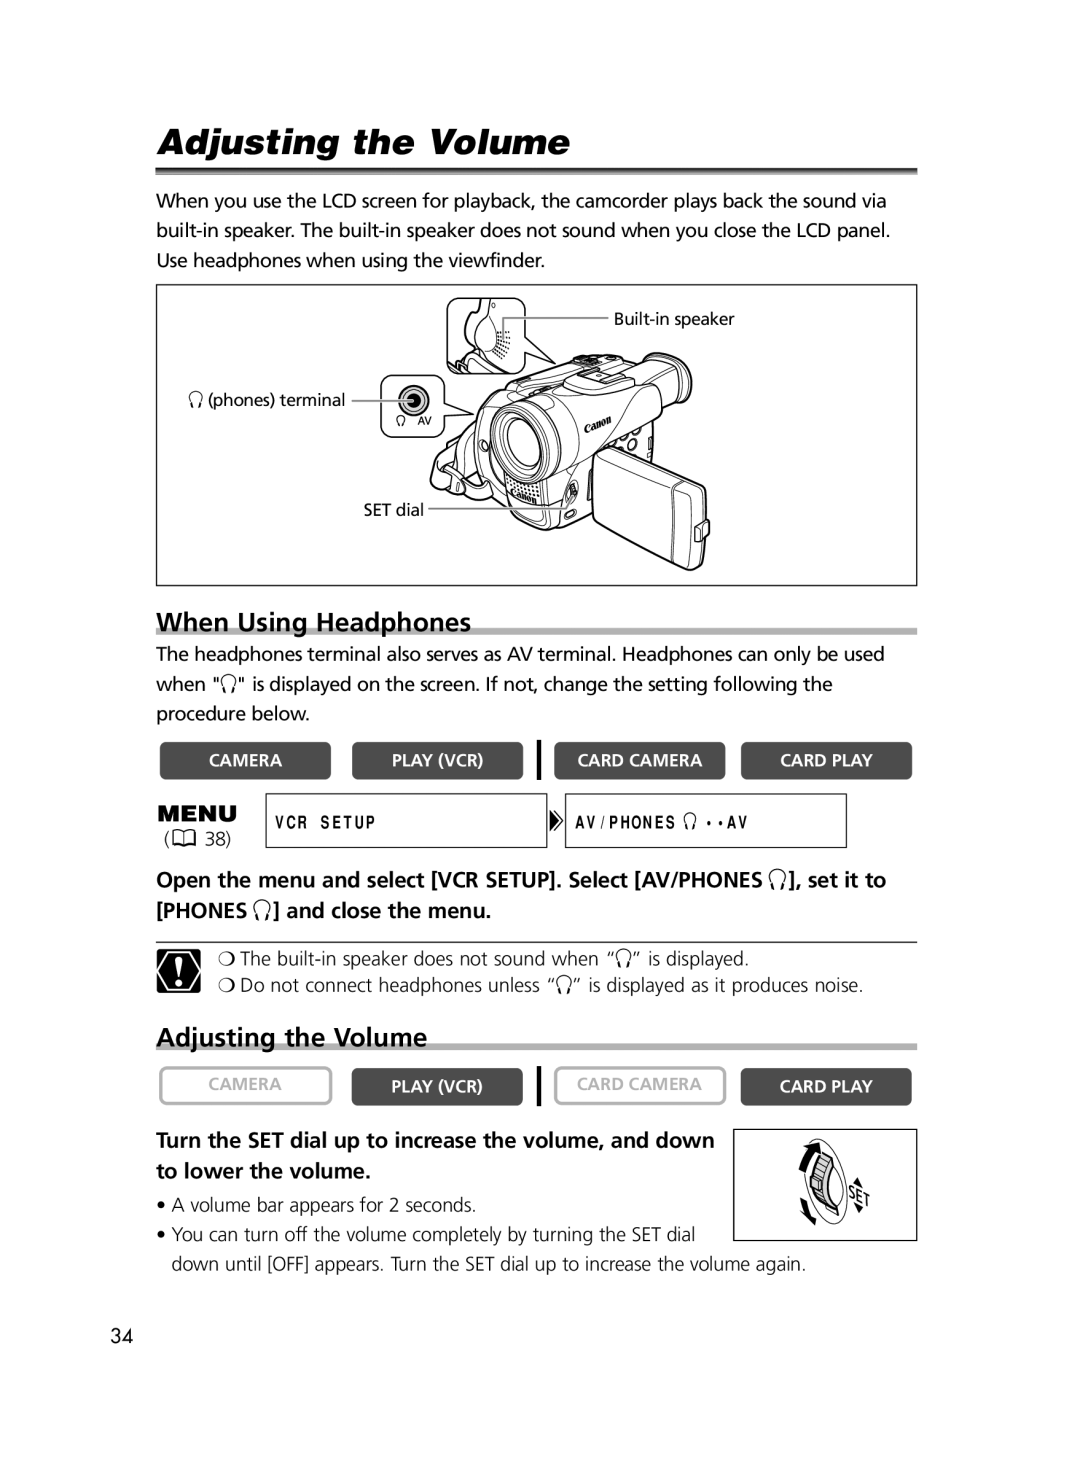 Canon 60, 65 instruction manual Adjusting the Volume, When Using Headphones 